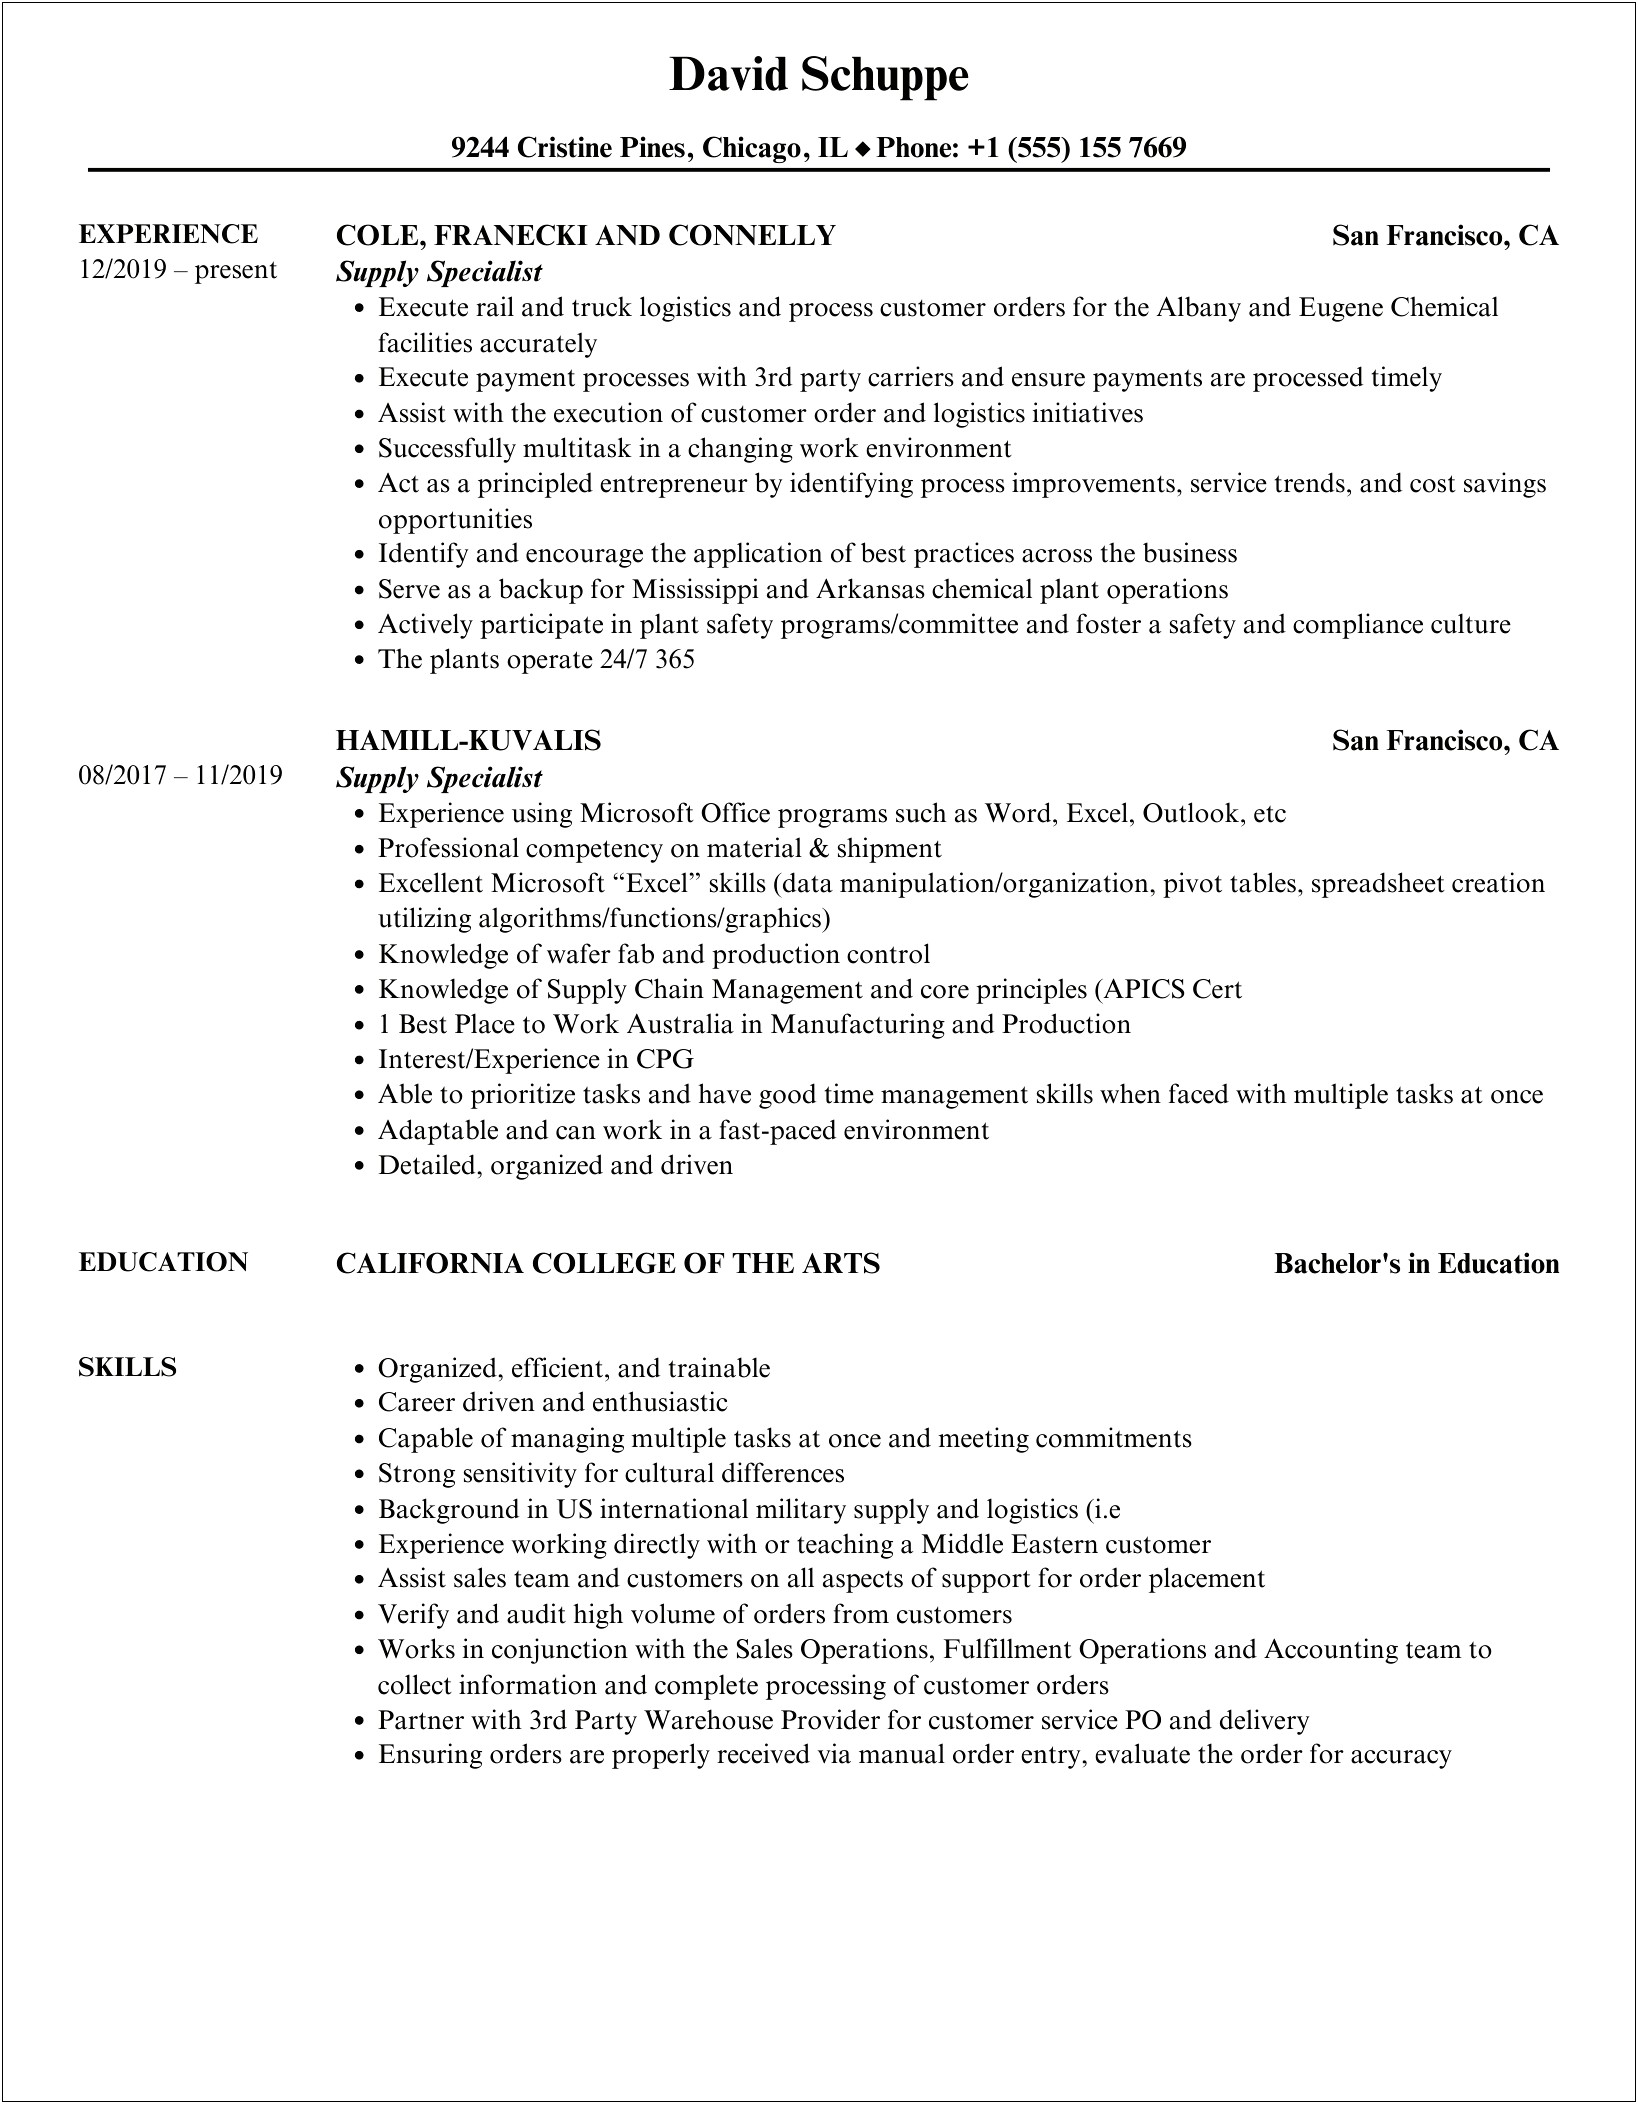 Resume Summary For Unit Supply Specialist